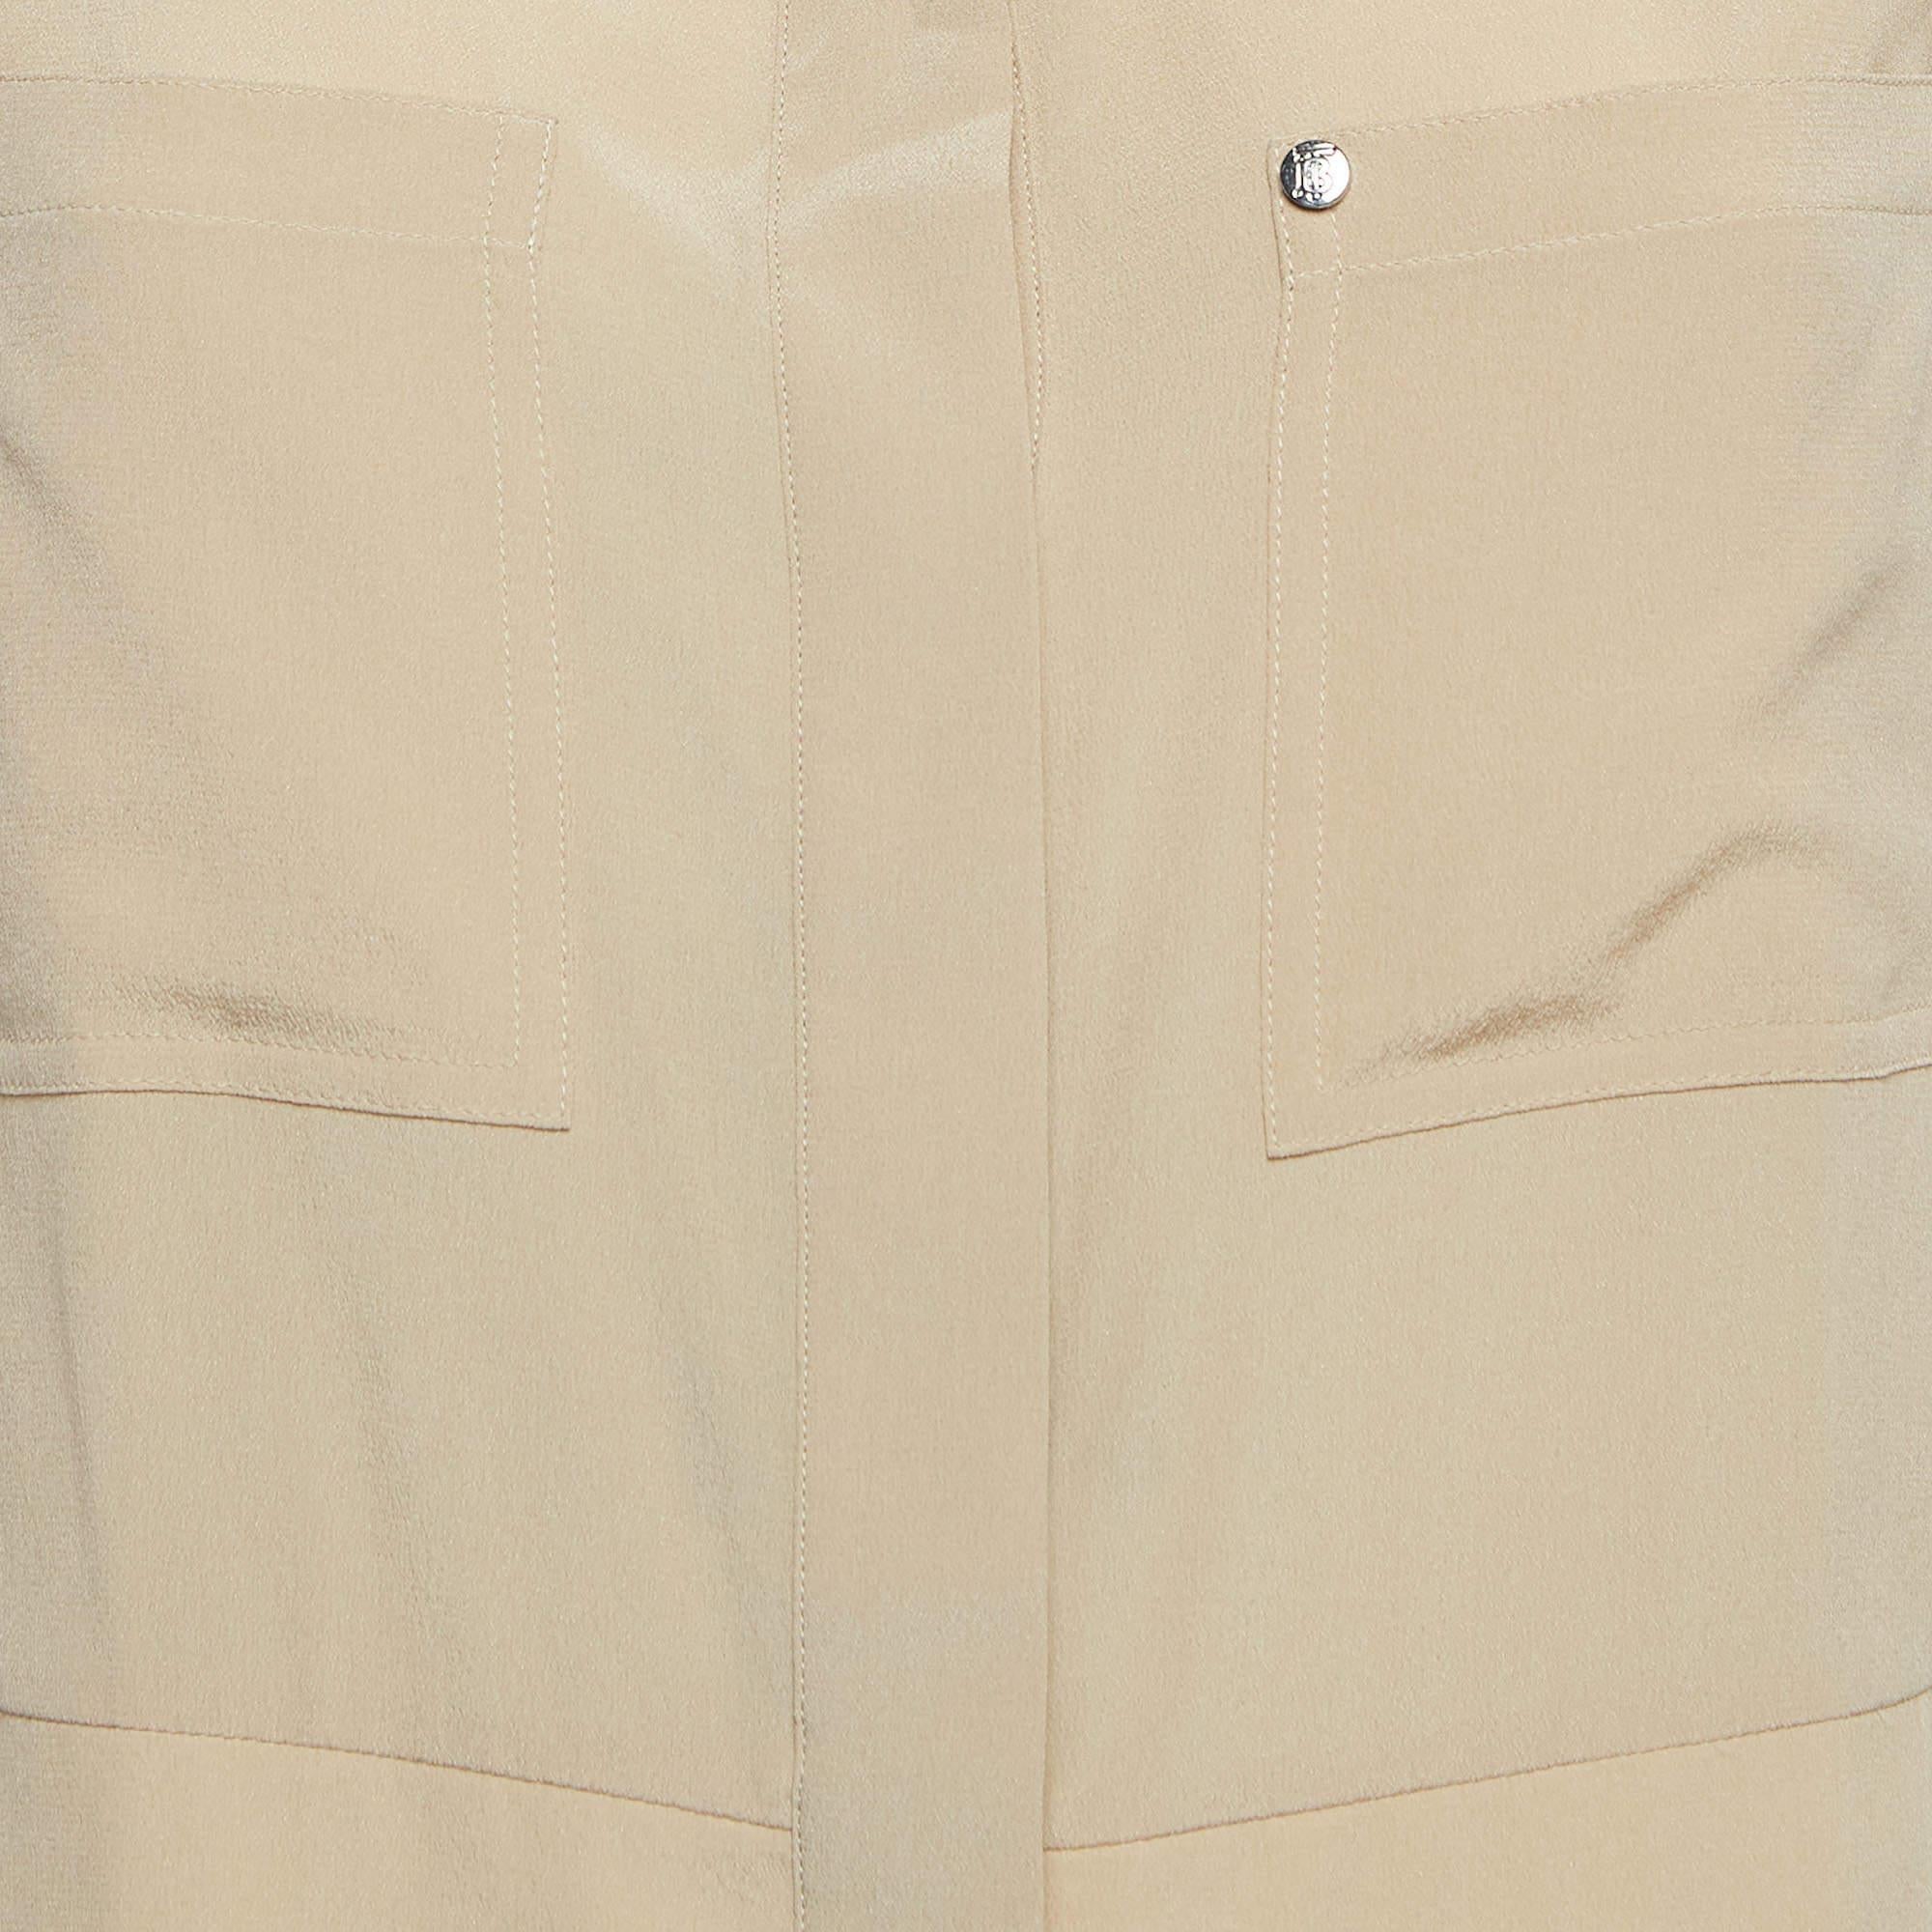 Burberry Beige Silk Buttoned A-Line Sleeveless Shirt Blouse S In New Condition For Sale In Dubai, Al Qouz 2